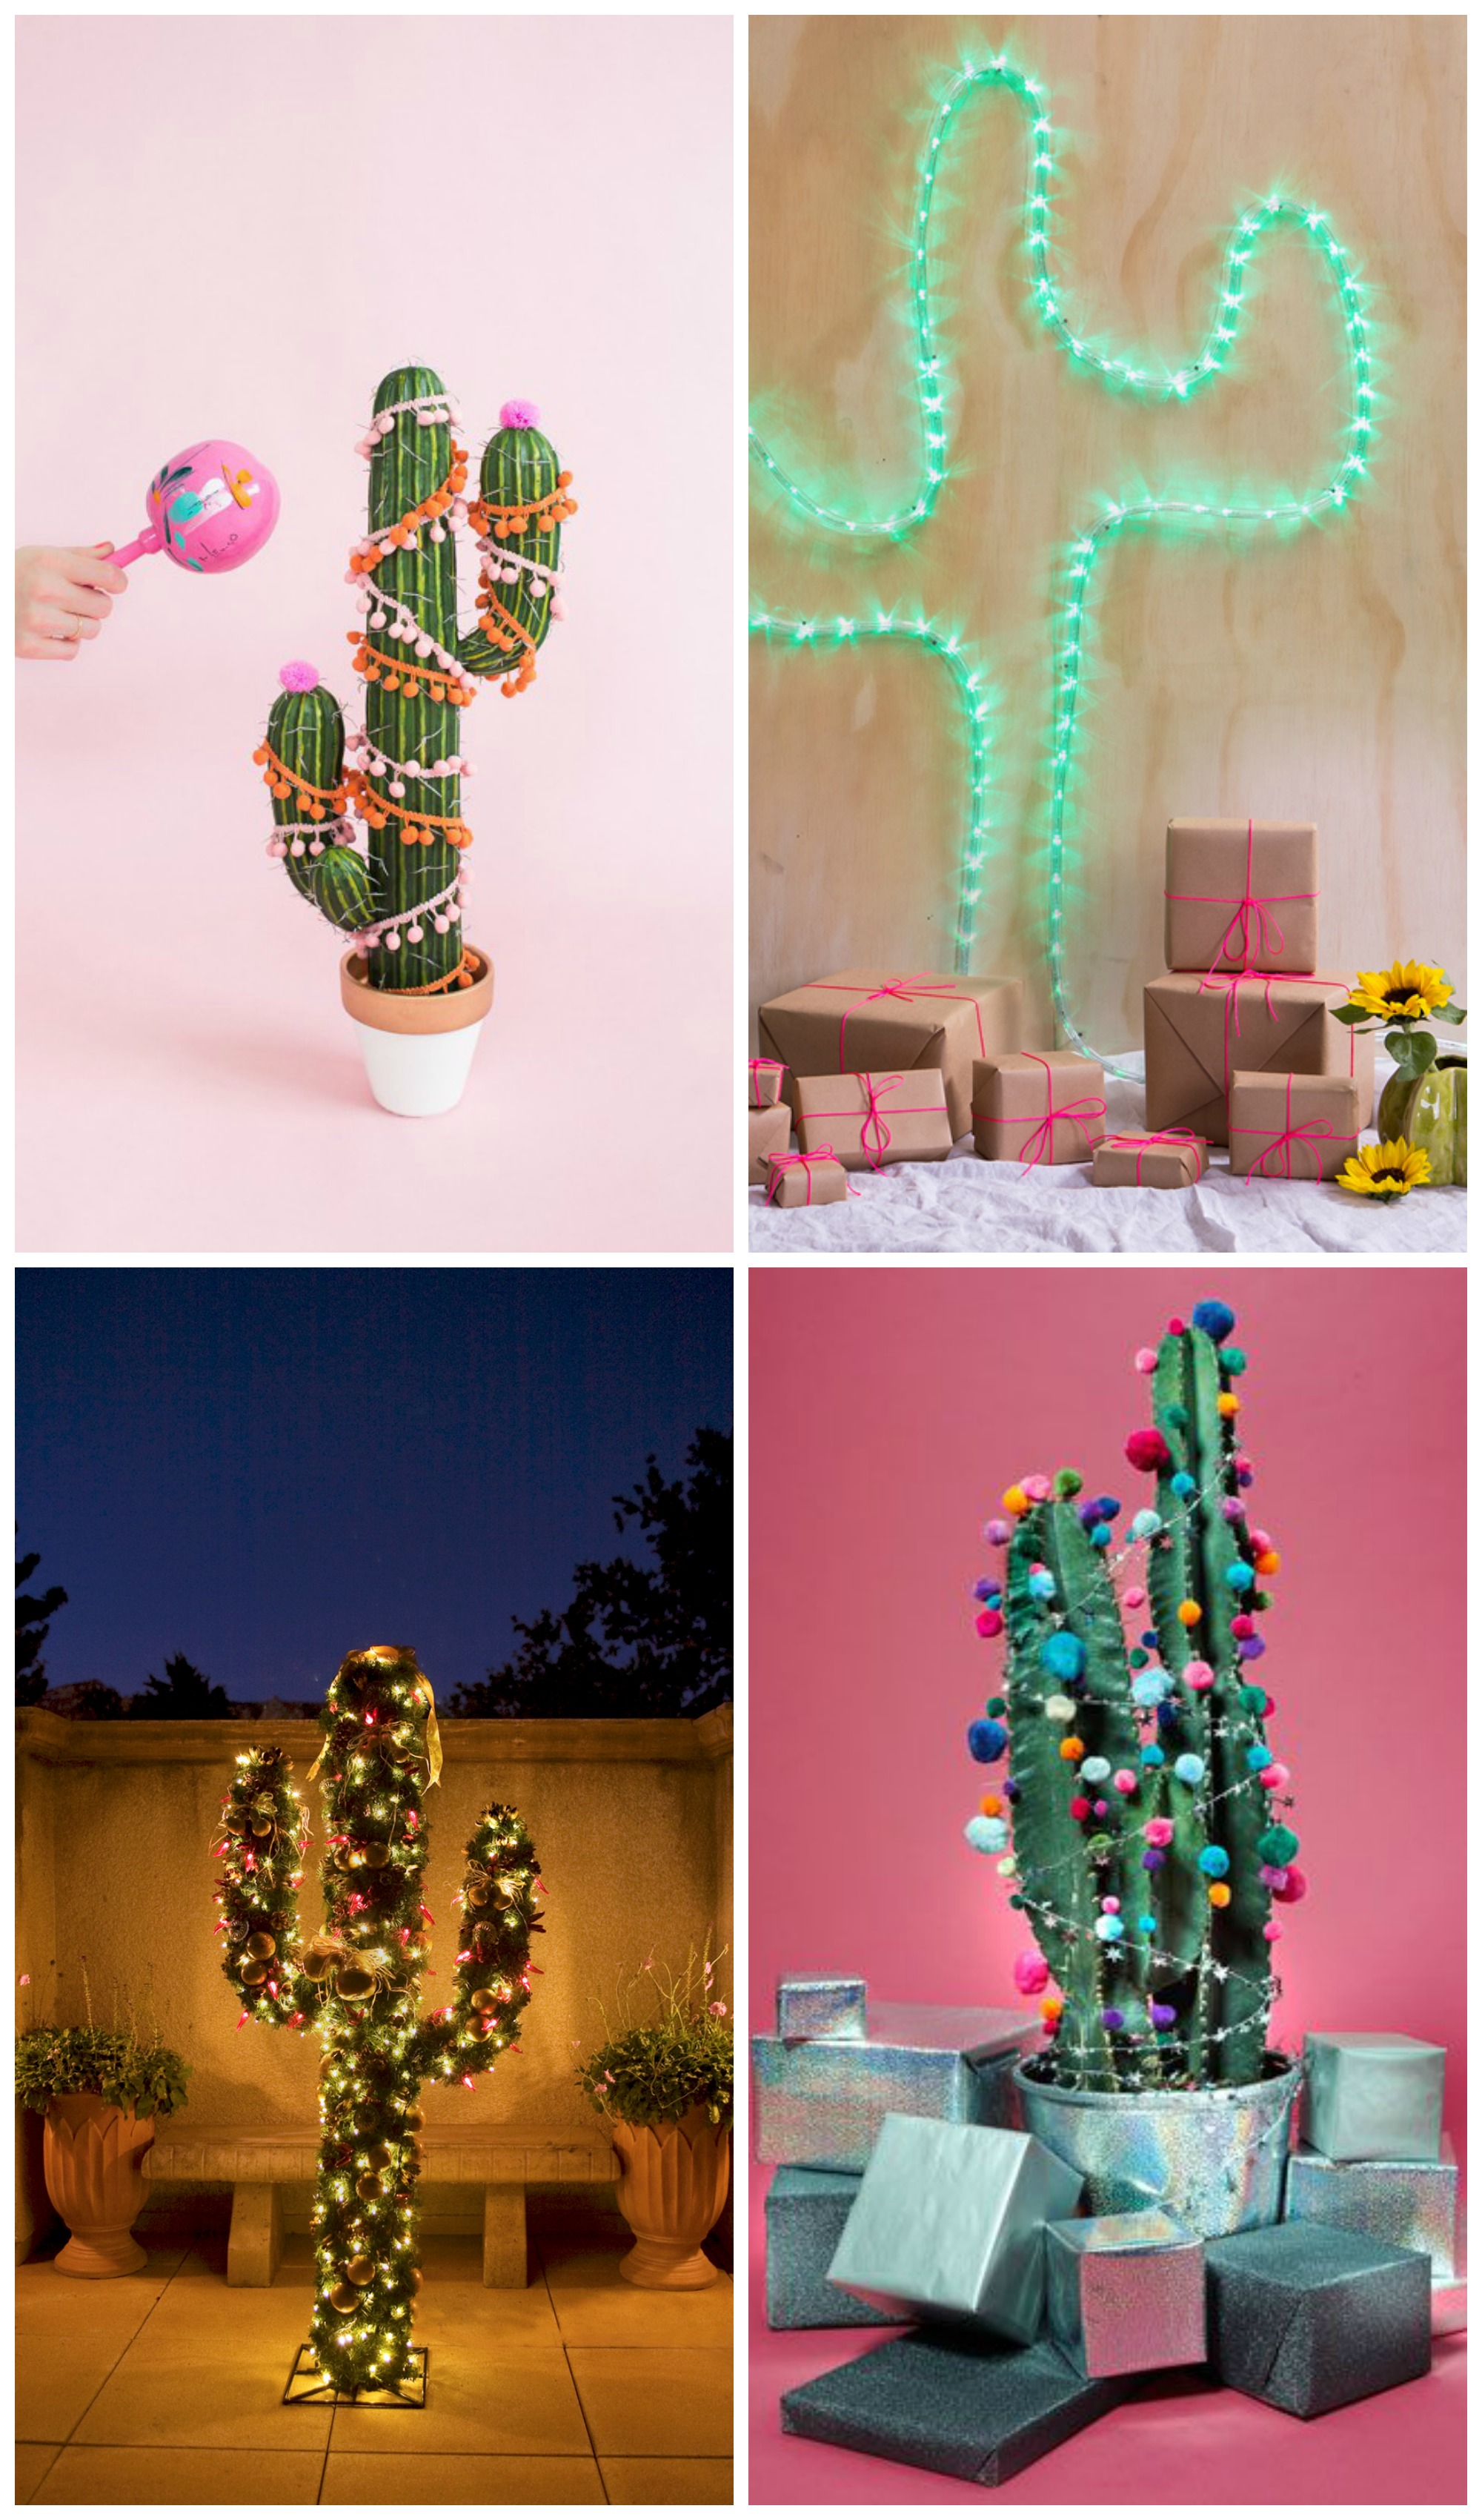 The Cactus Christmas Tree - WELL I GUESS THIS IS GROWING UP